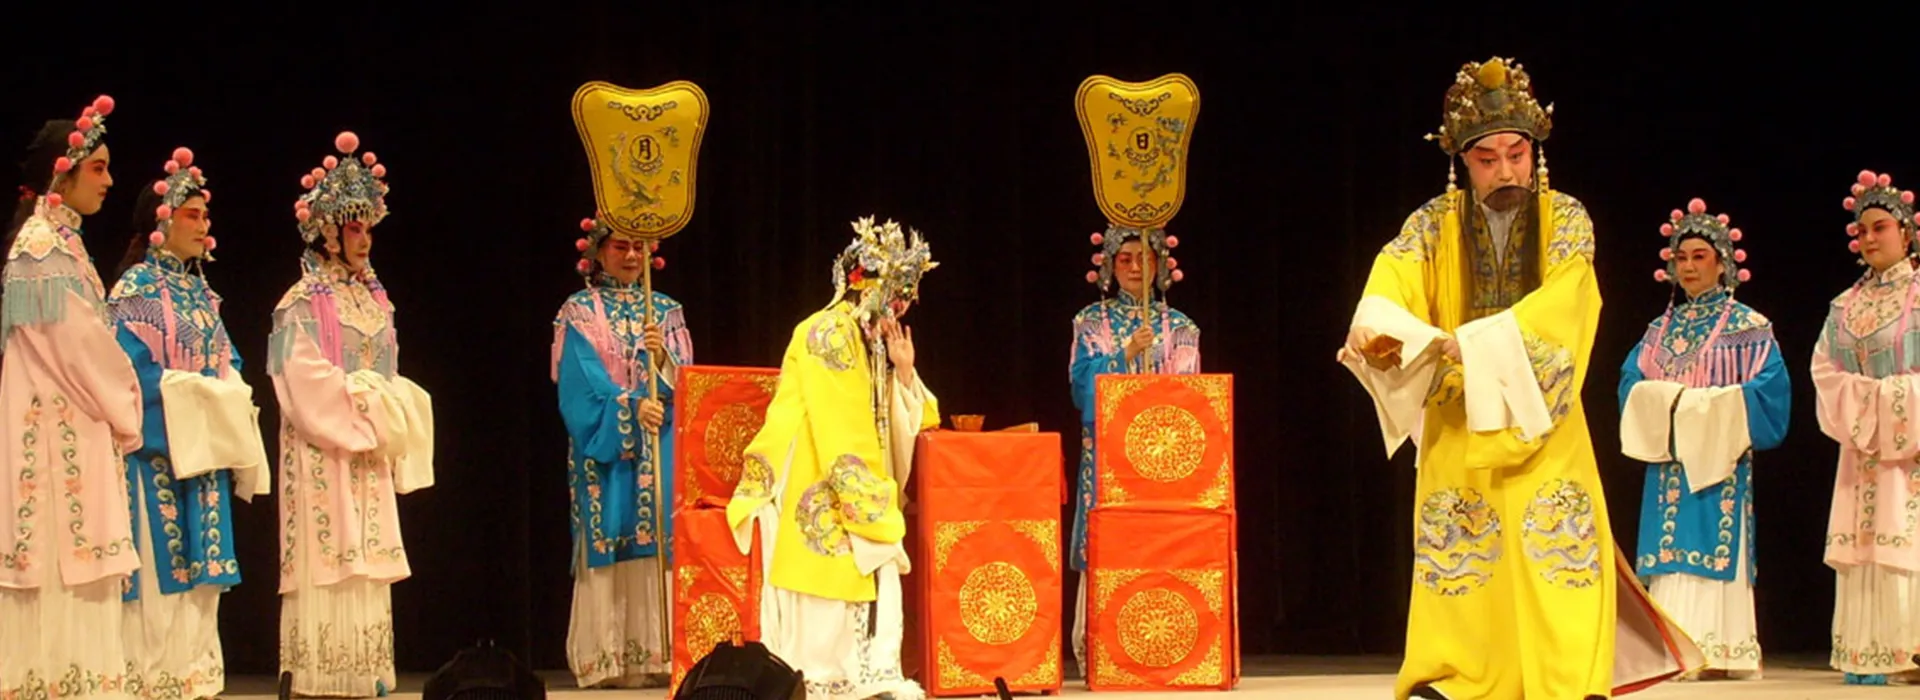 A Frenchman’s View of Chinese Opera